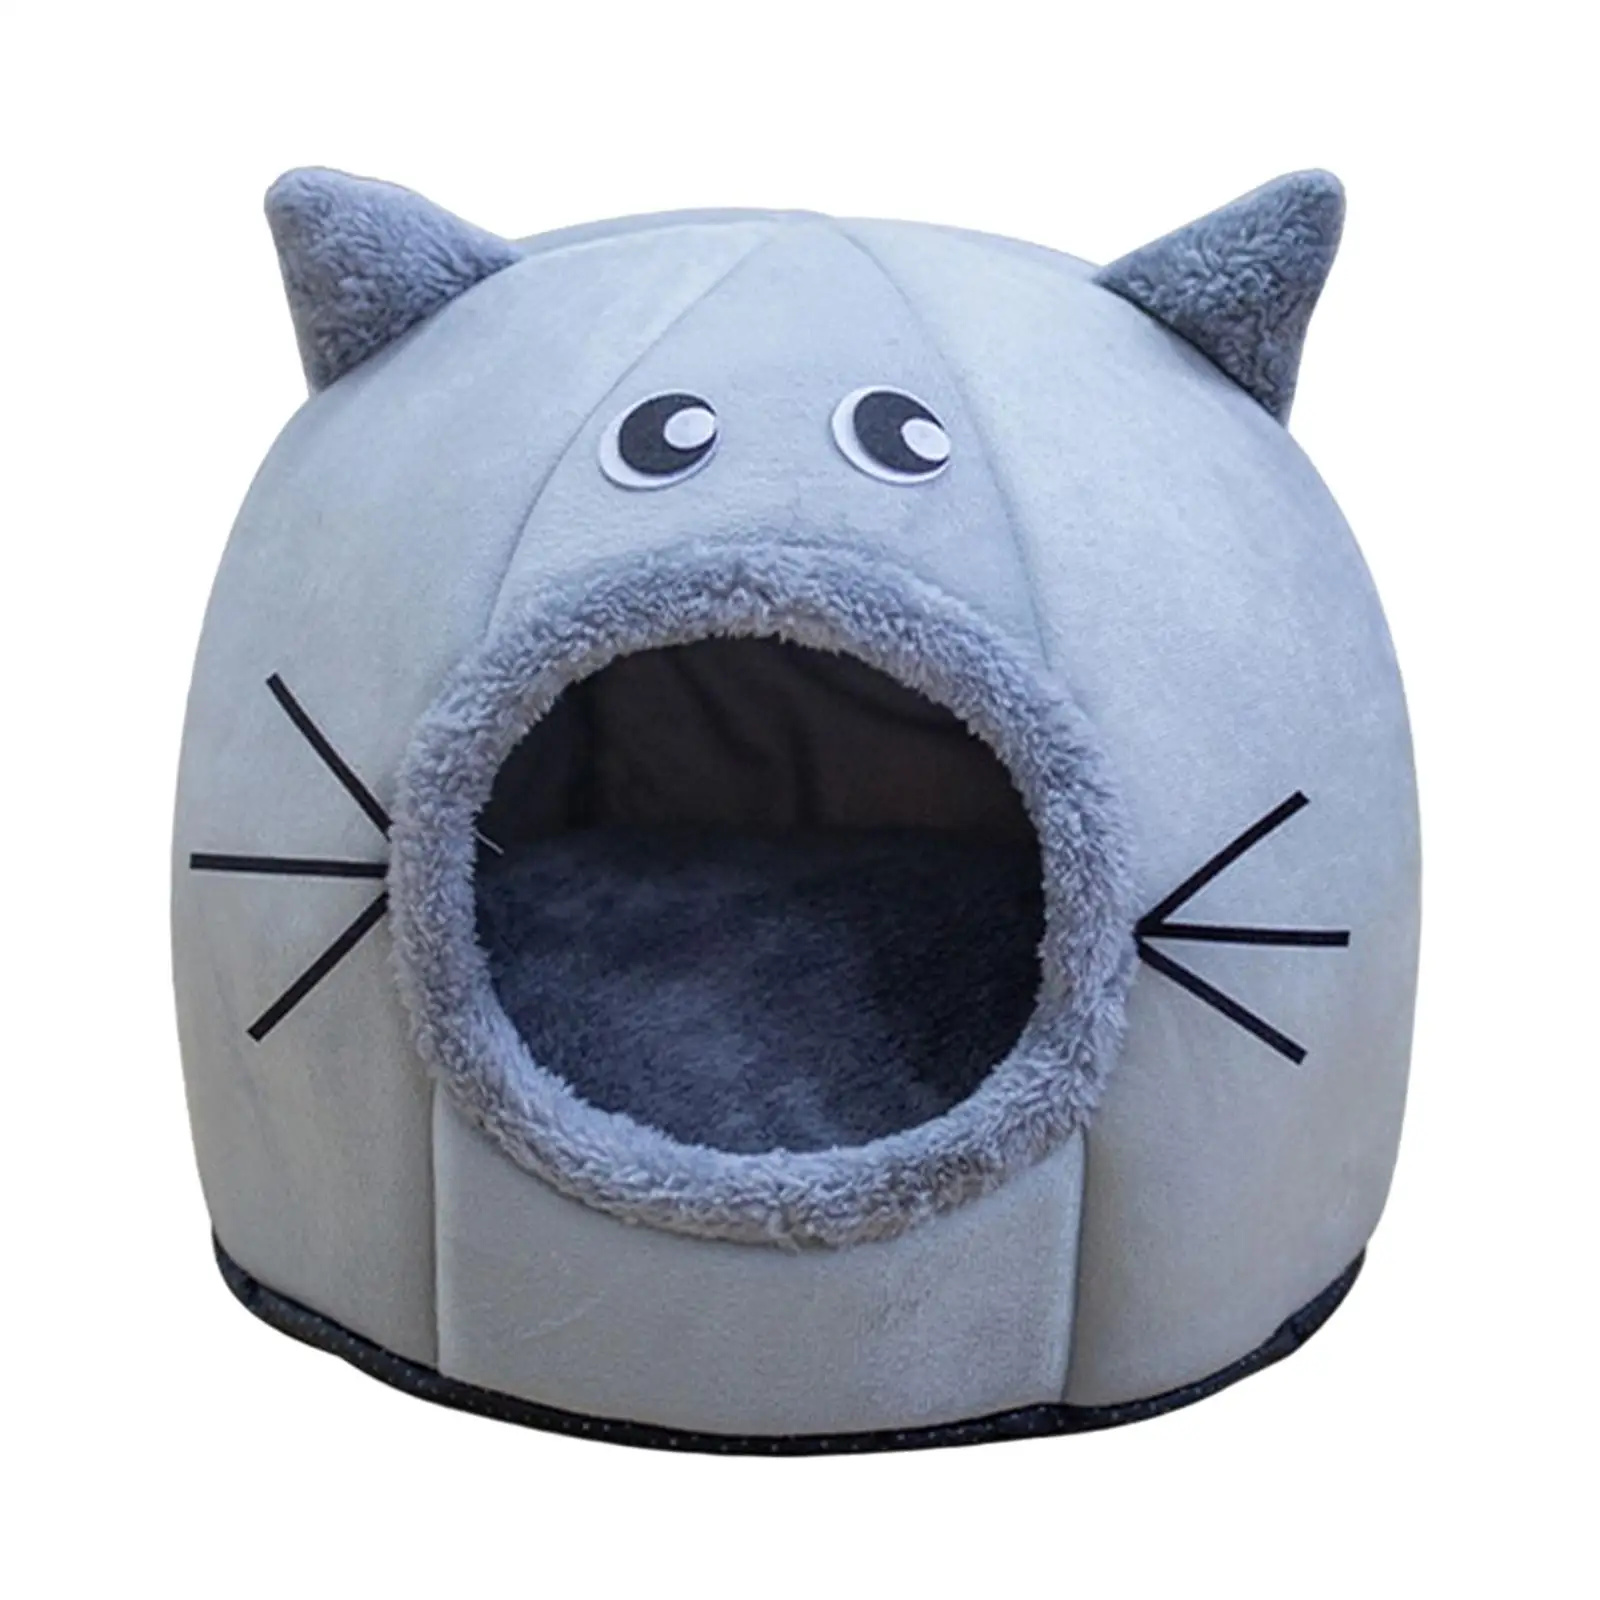 Pet Bed Semi Enclosed Cat Nest Sleeping Bed for Kittens or Small Dogs